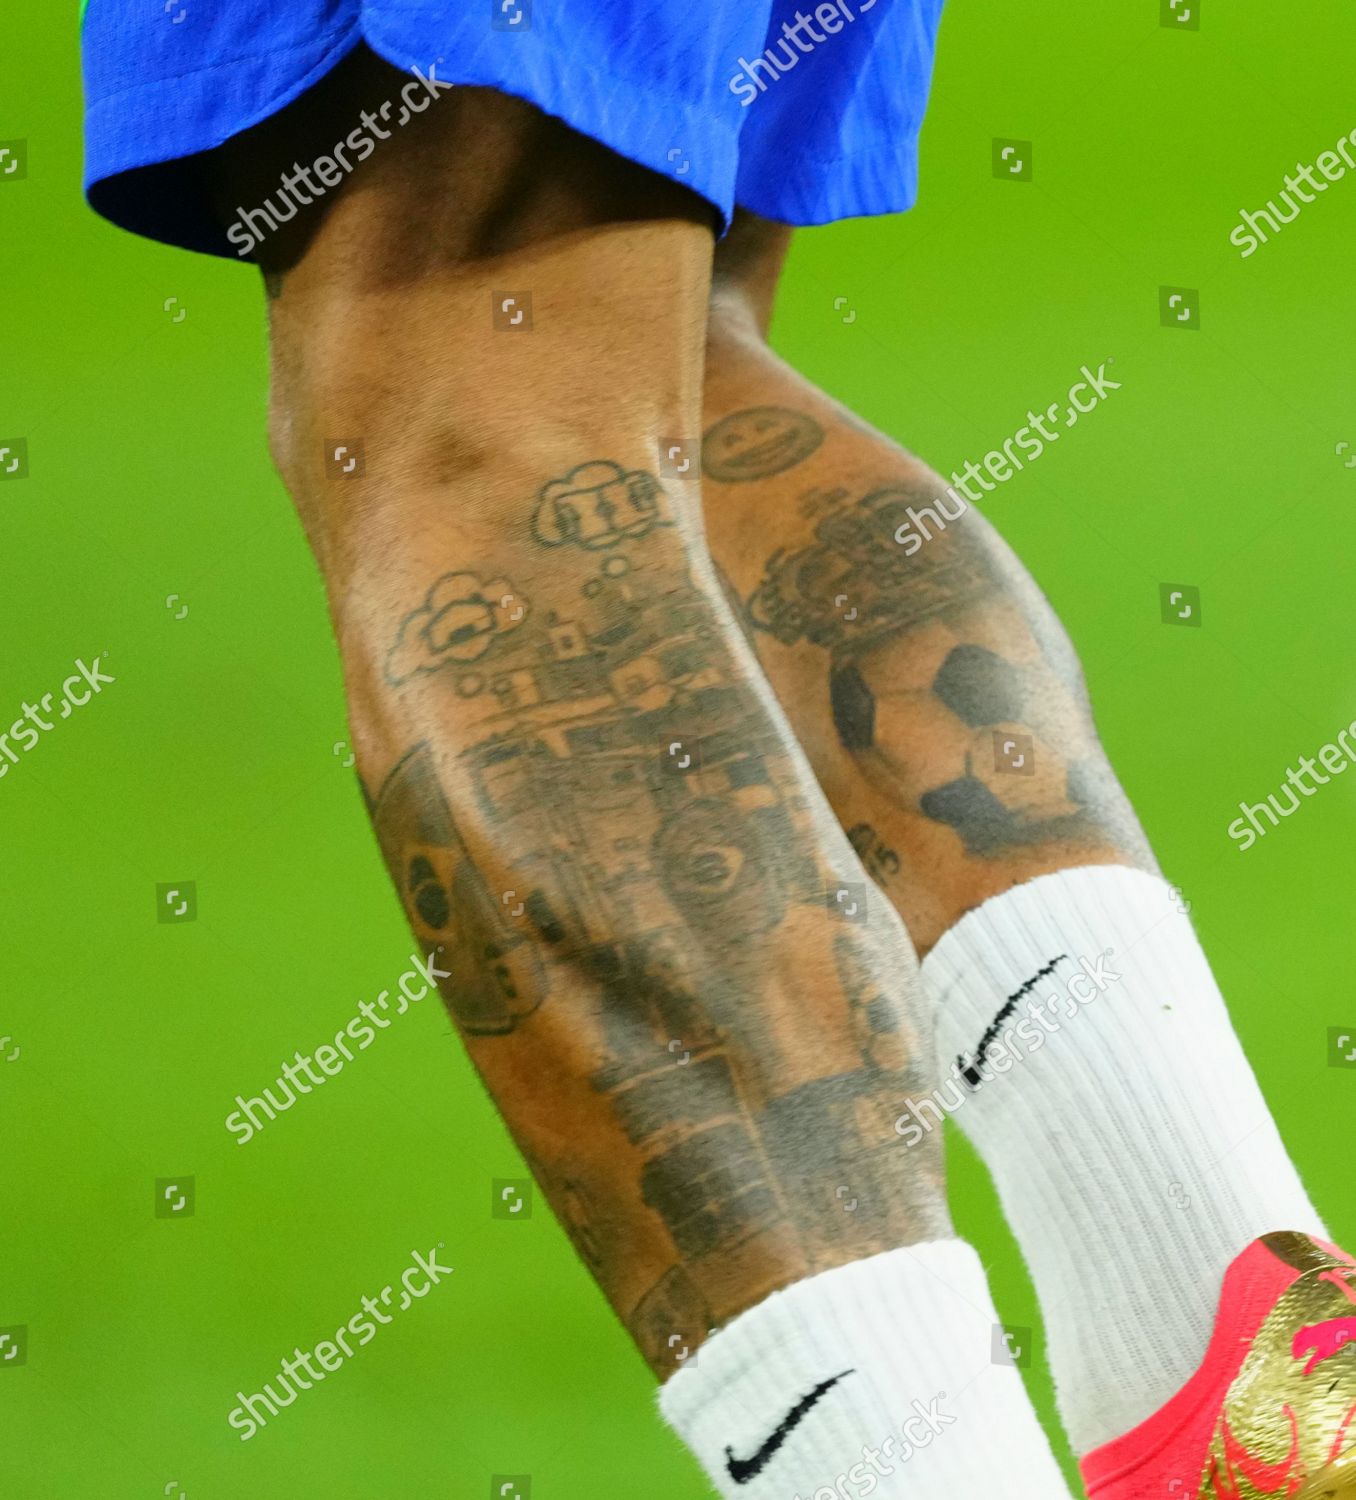 NEYMAR PSG with tattoo and earrings earring warming up Football  Champions League quarterfinals return match Paris St Germain PSG  FC  Bayern Munich M 0 1 on April 13th 2021 in ParisFrance